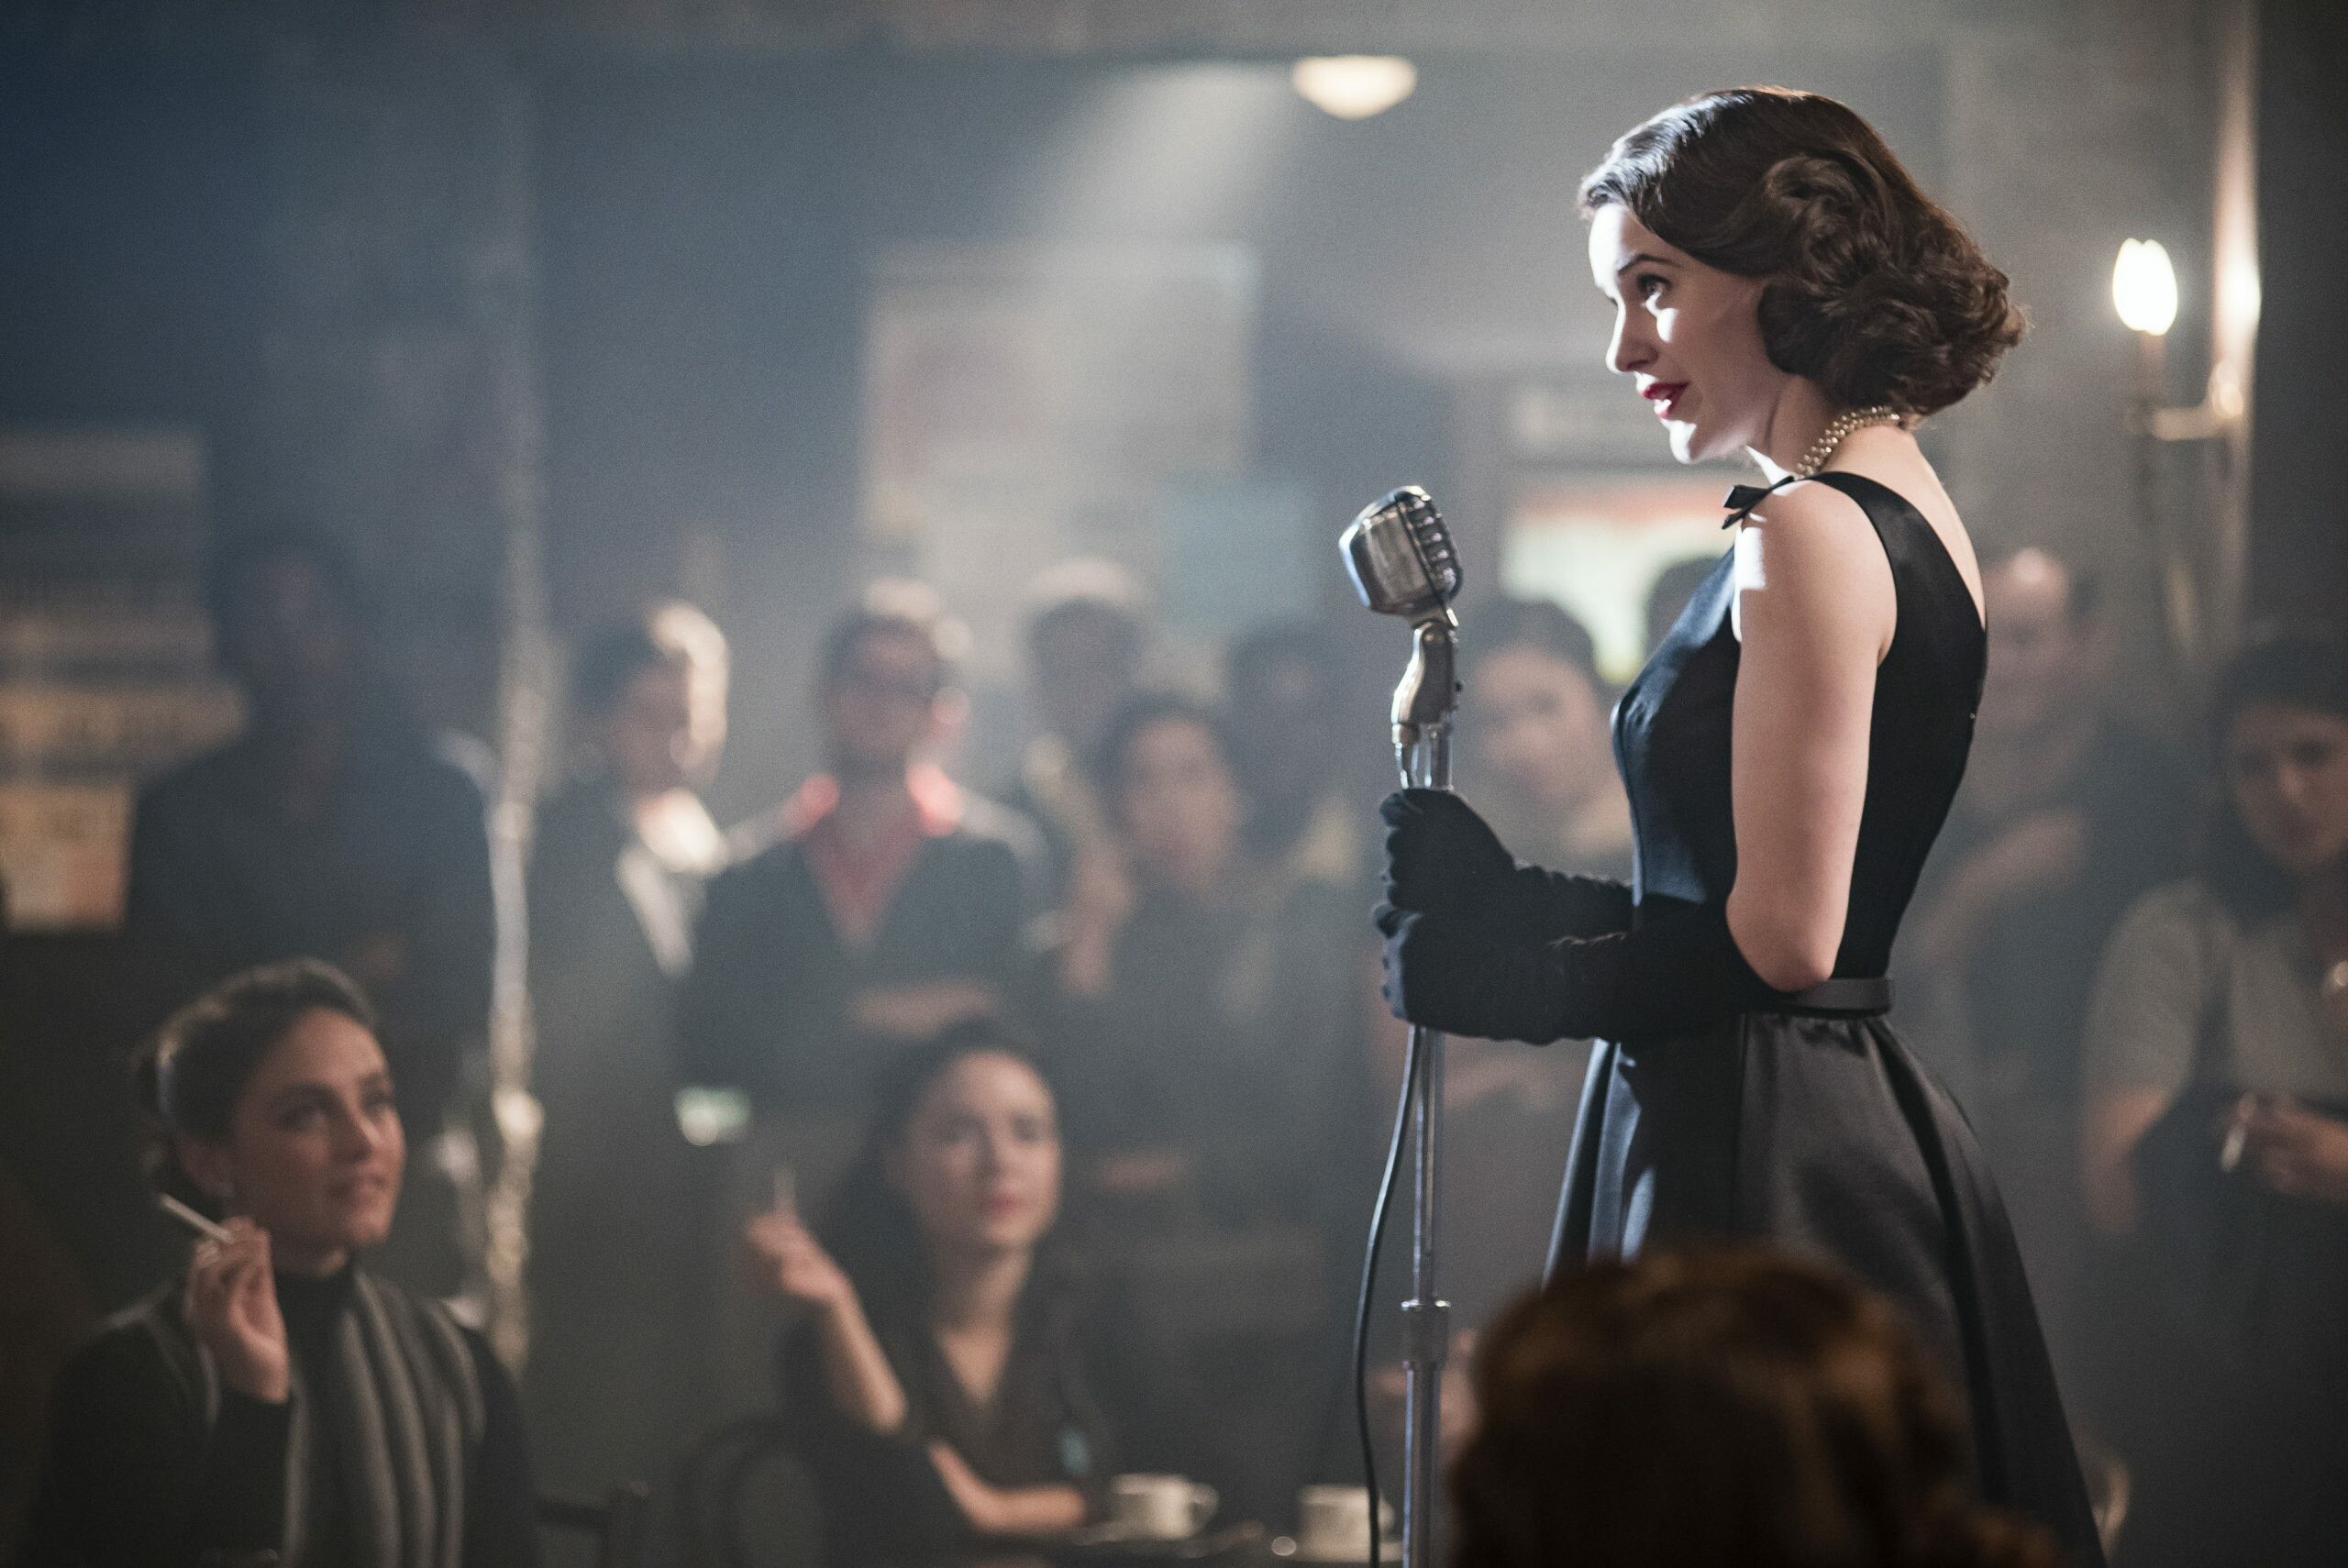 The Marvelous Mrs. Maisel: Season 4, Television series, created by Amy Sherman-Palladino. 2560x1710 HD Wallpaper.